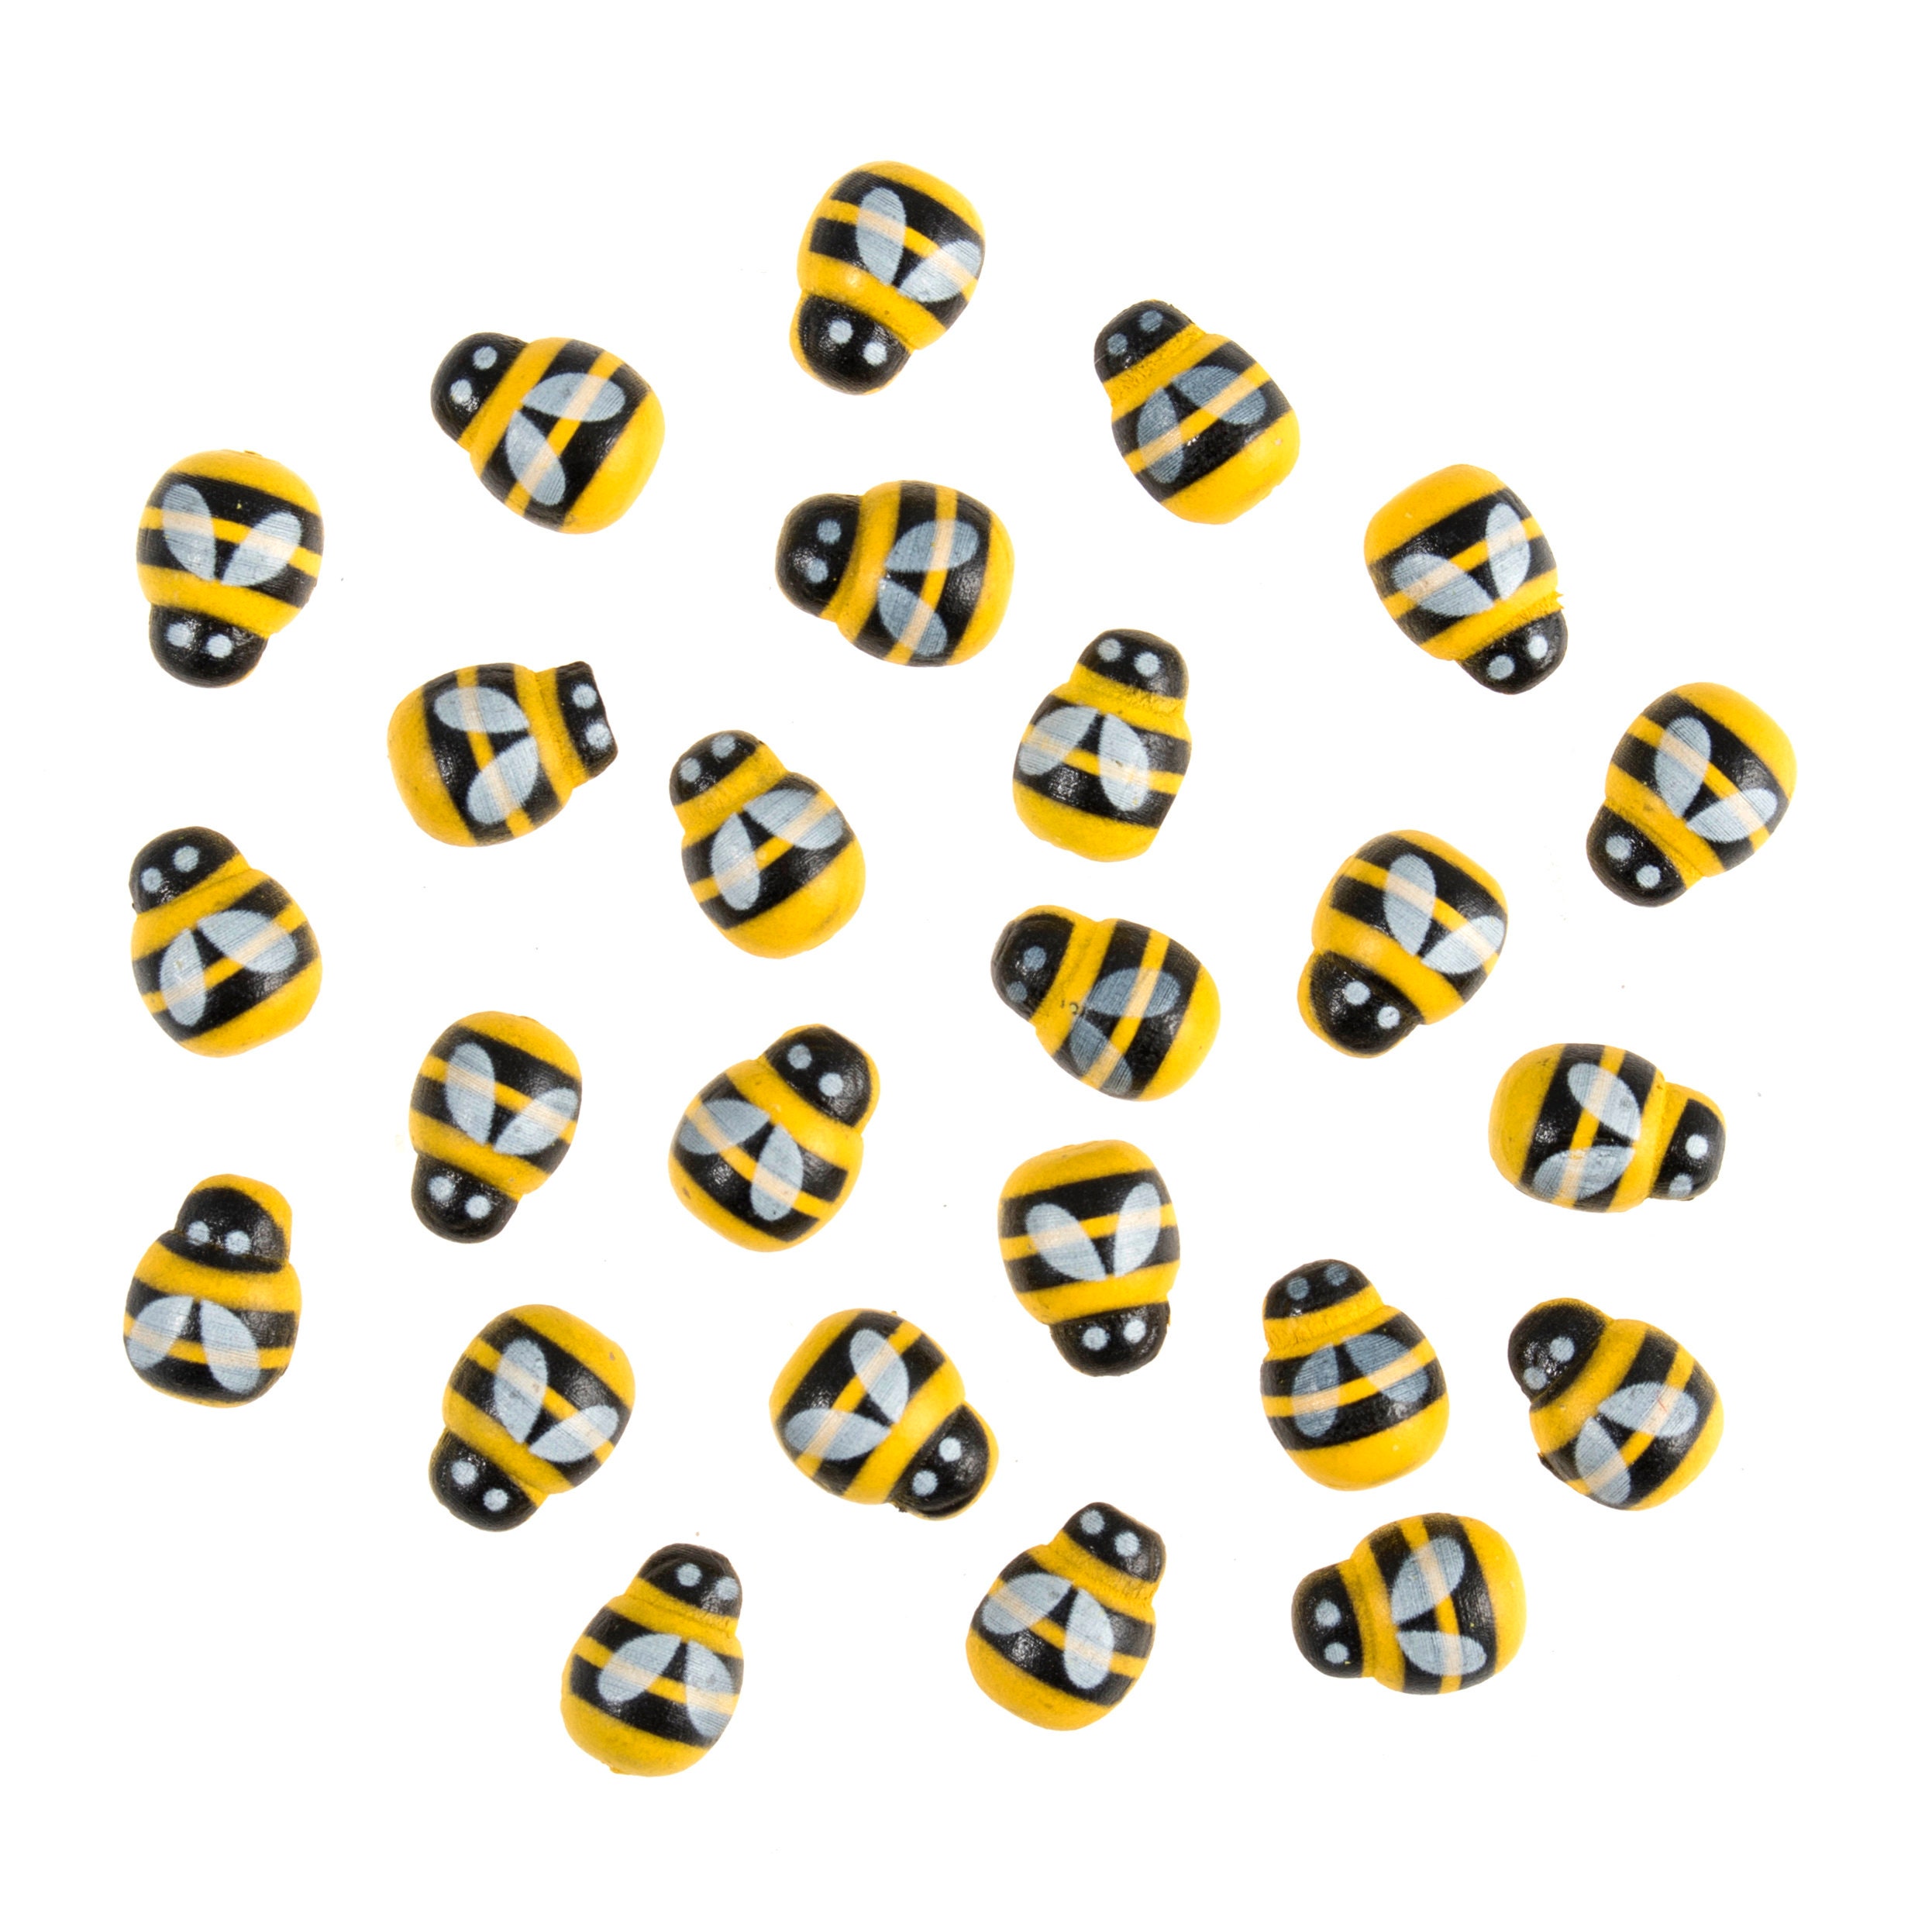 25 x Stick on Mini Ladybirds or Bumble Bess 9mm x 13mm Wooden Painted 25 x Bees 